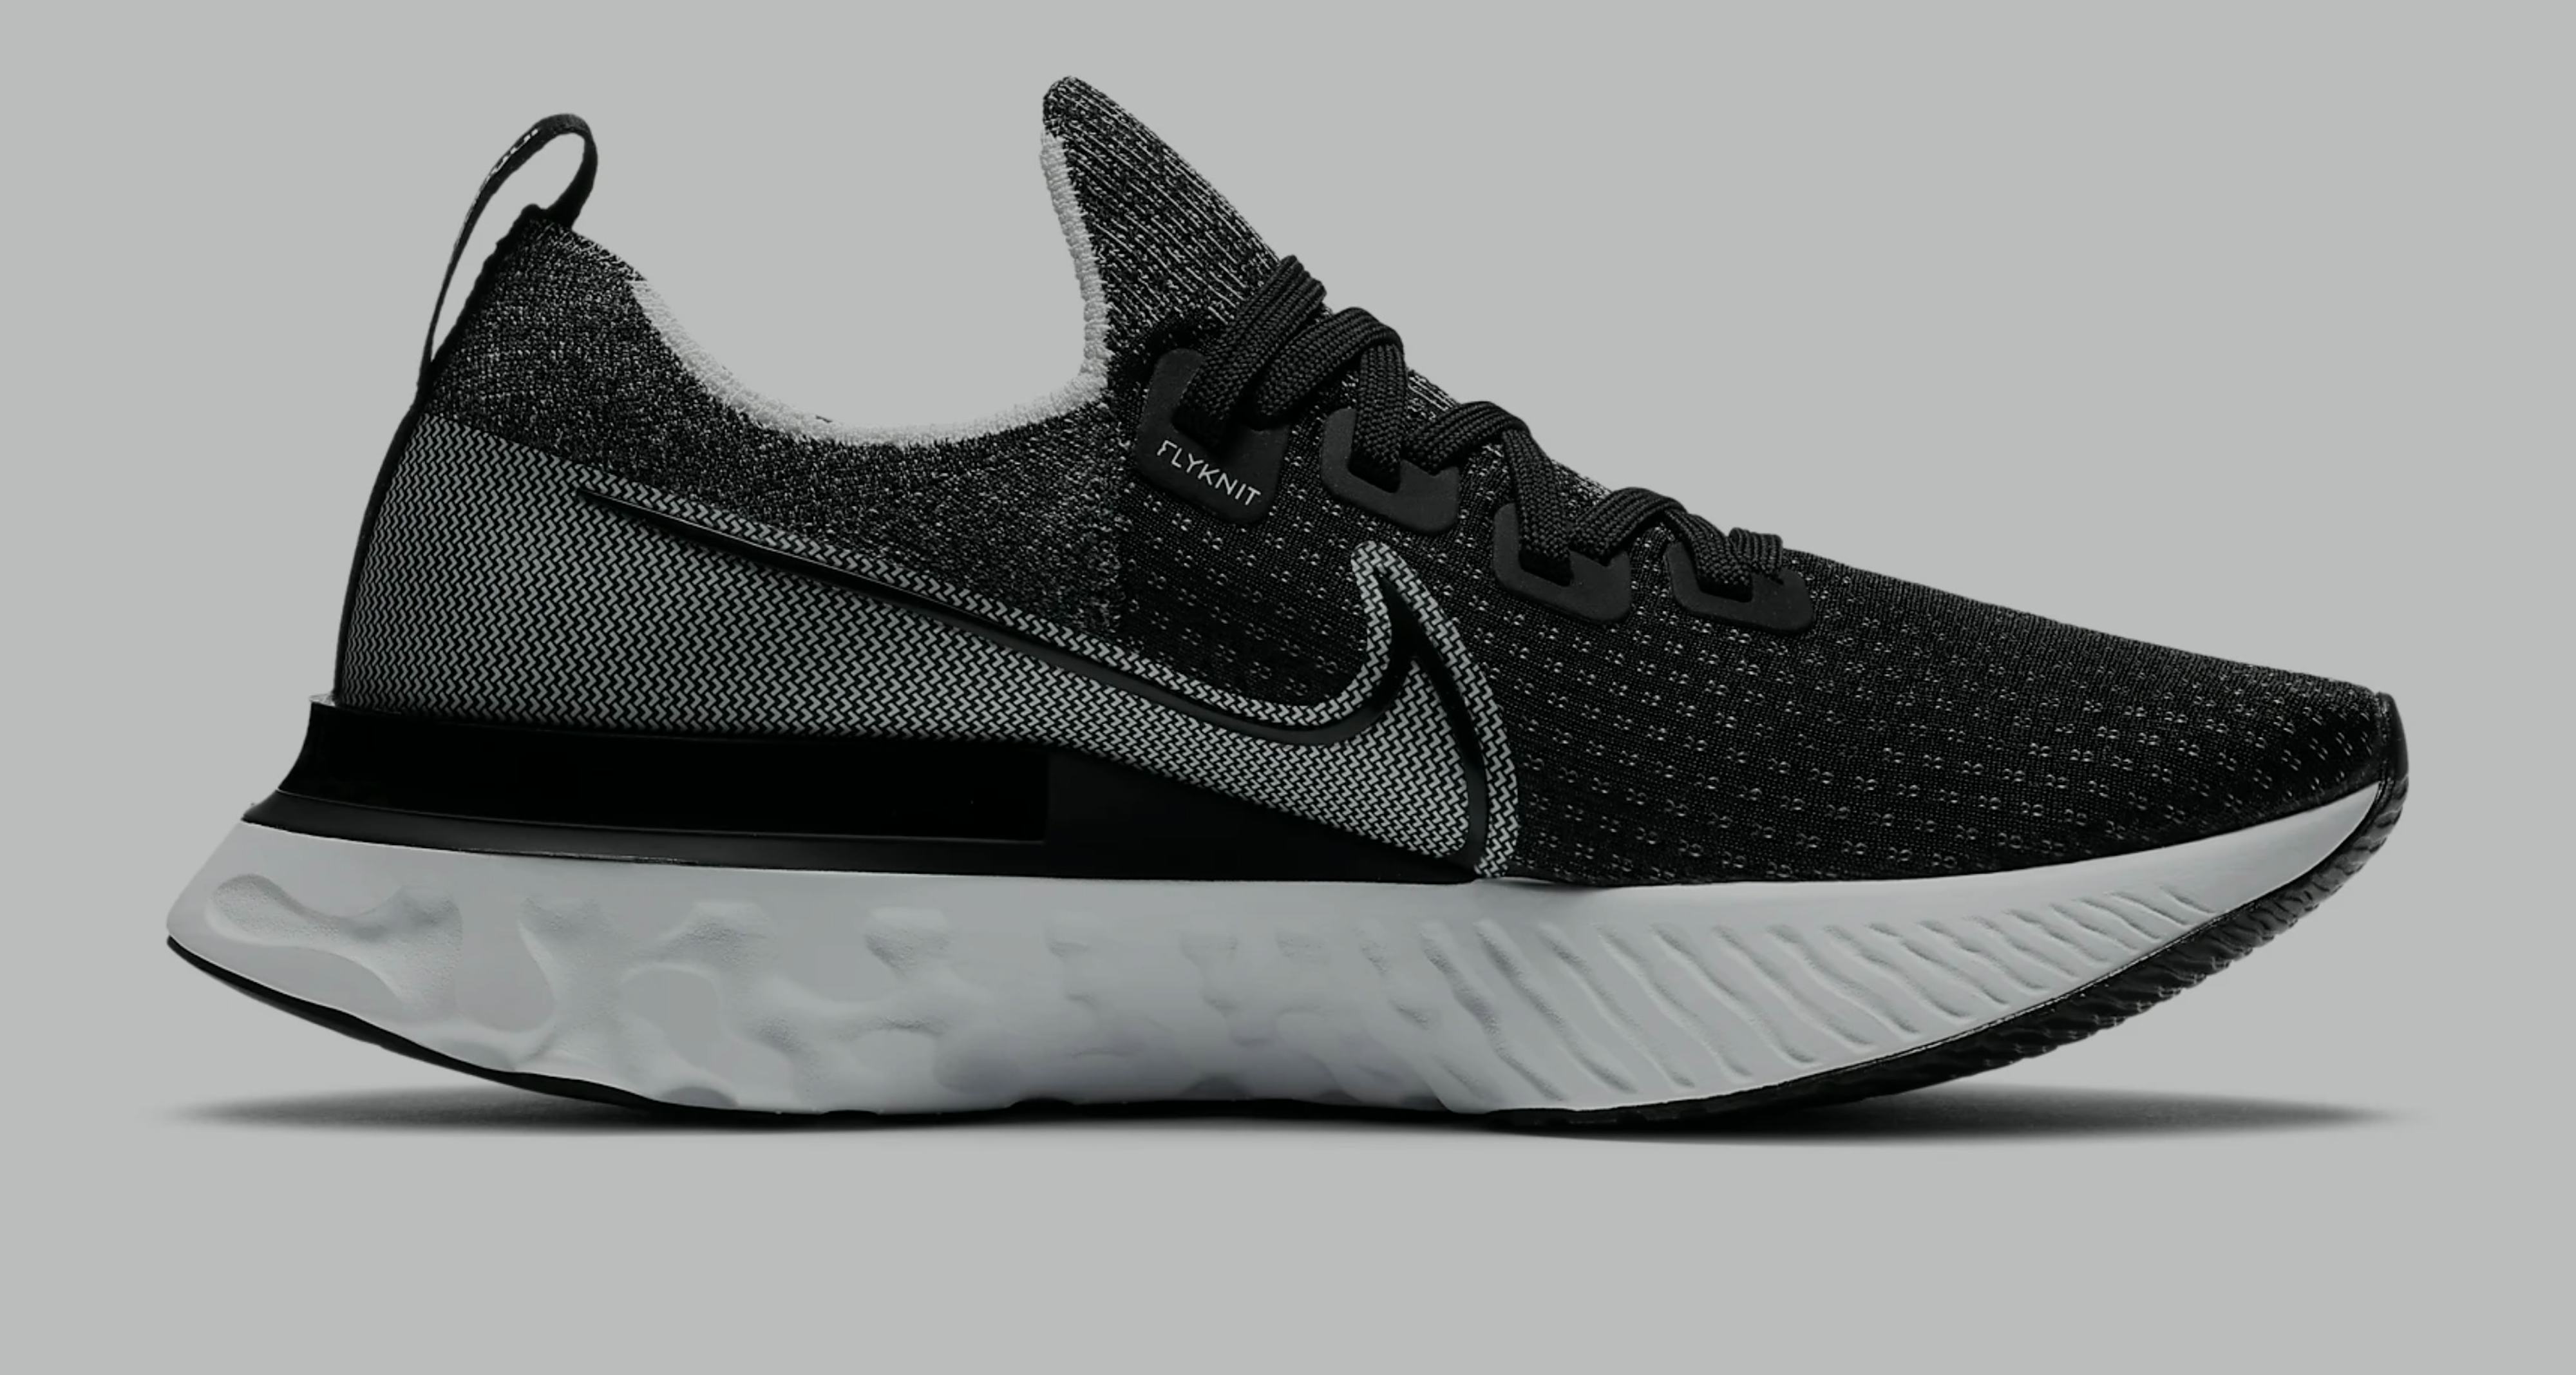 One of Nike's comfiest running shoes are 44 off right now